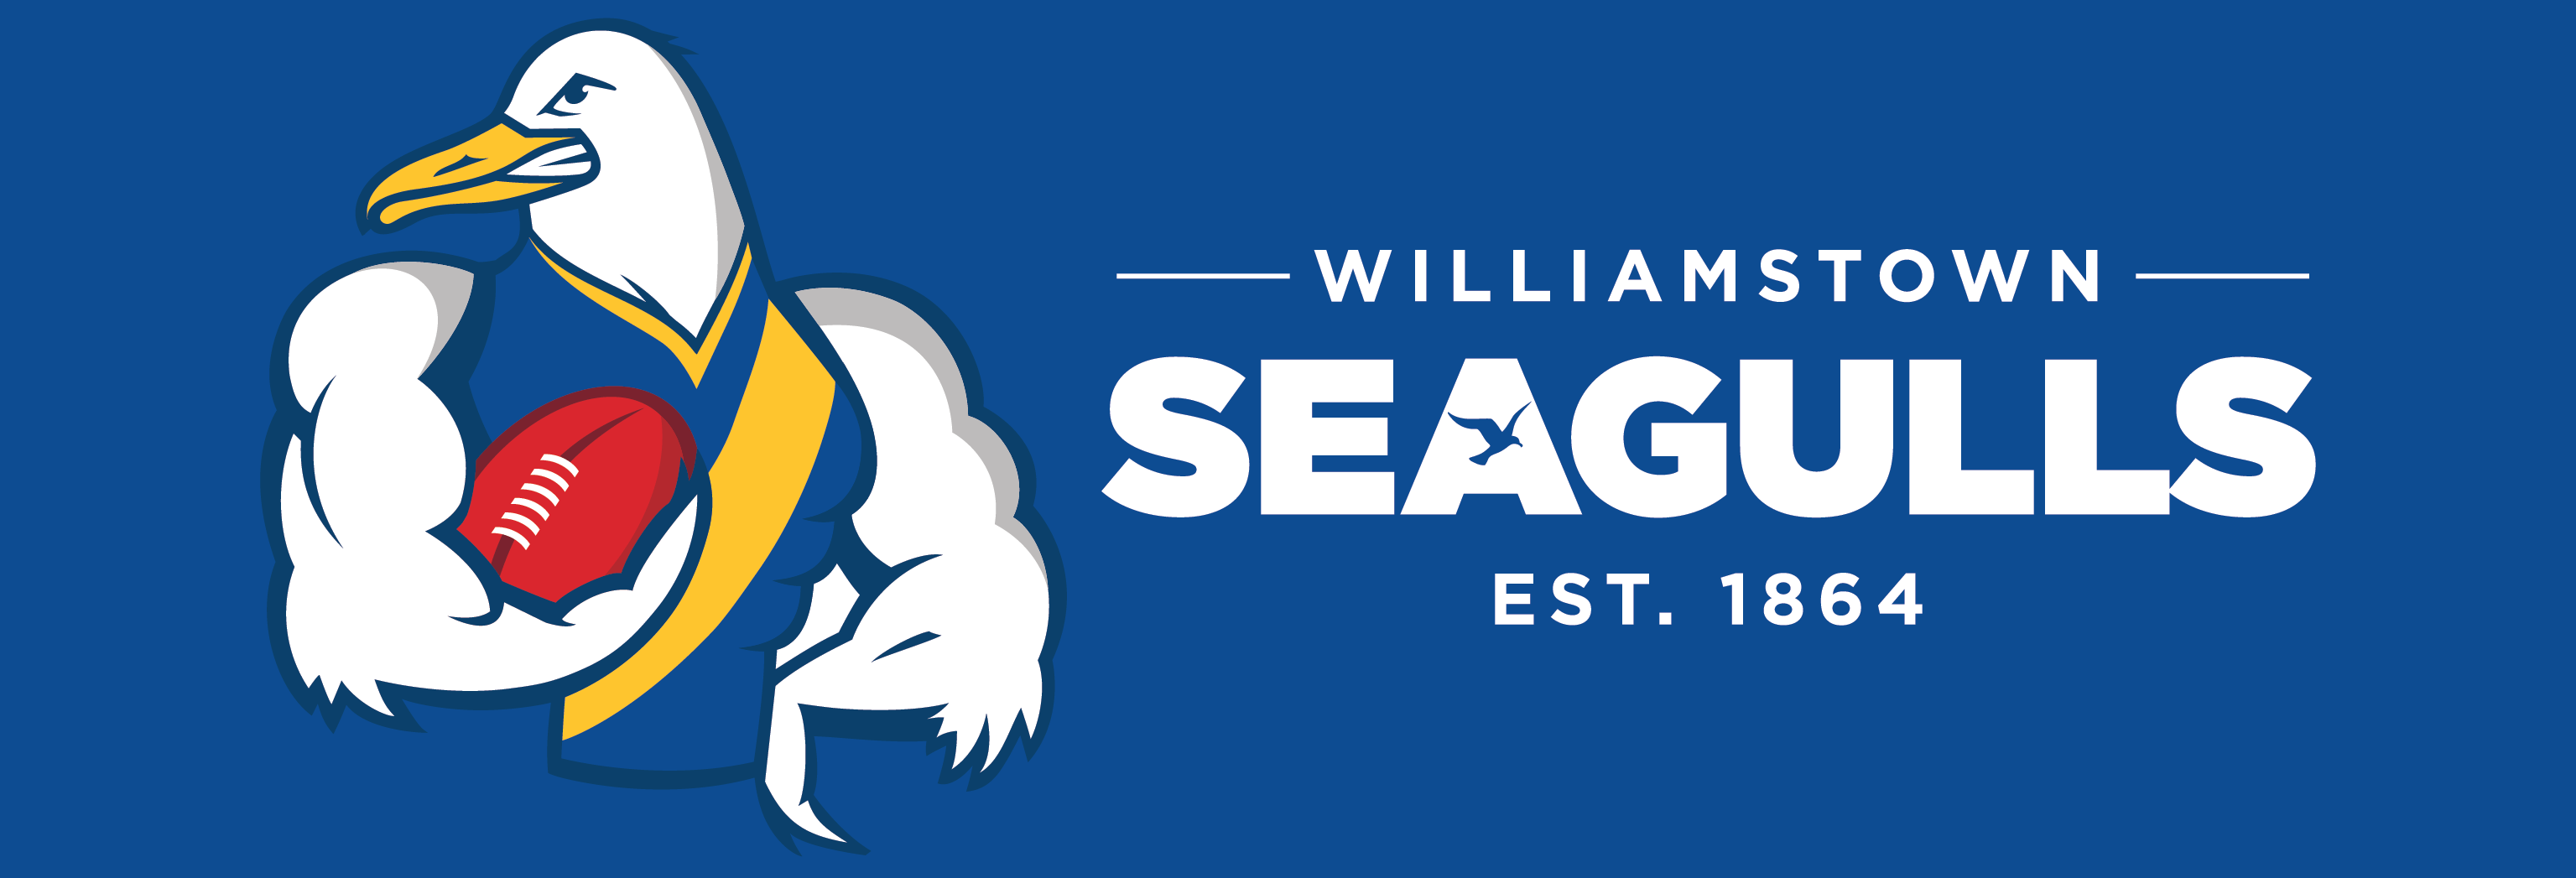 Williamstown Logo - Video: The Story of Ron Todd - Williamstown Football Club